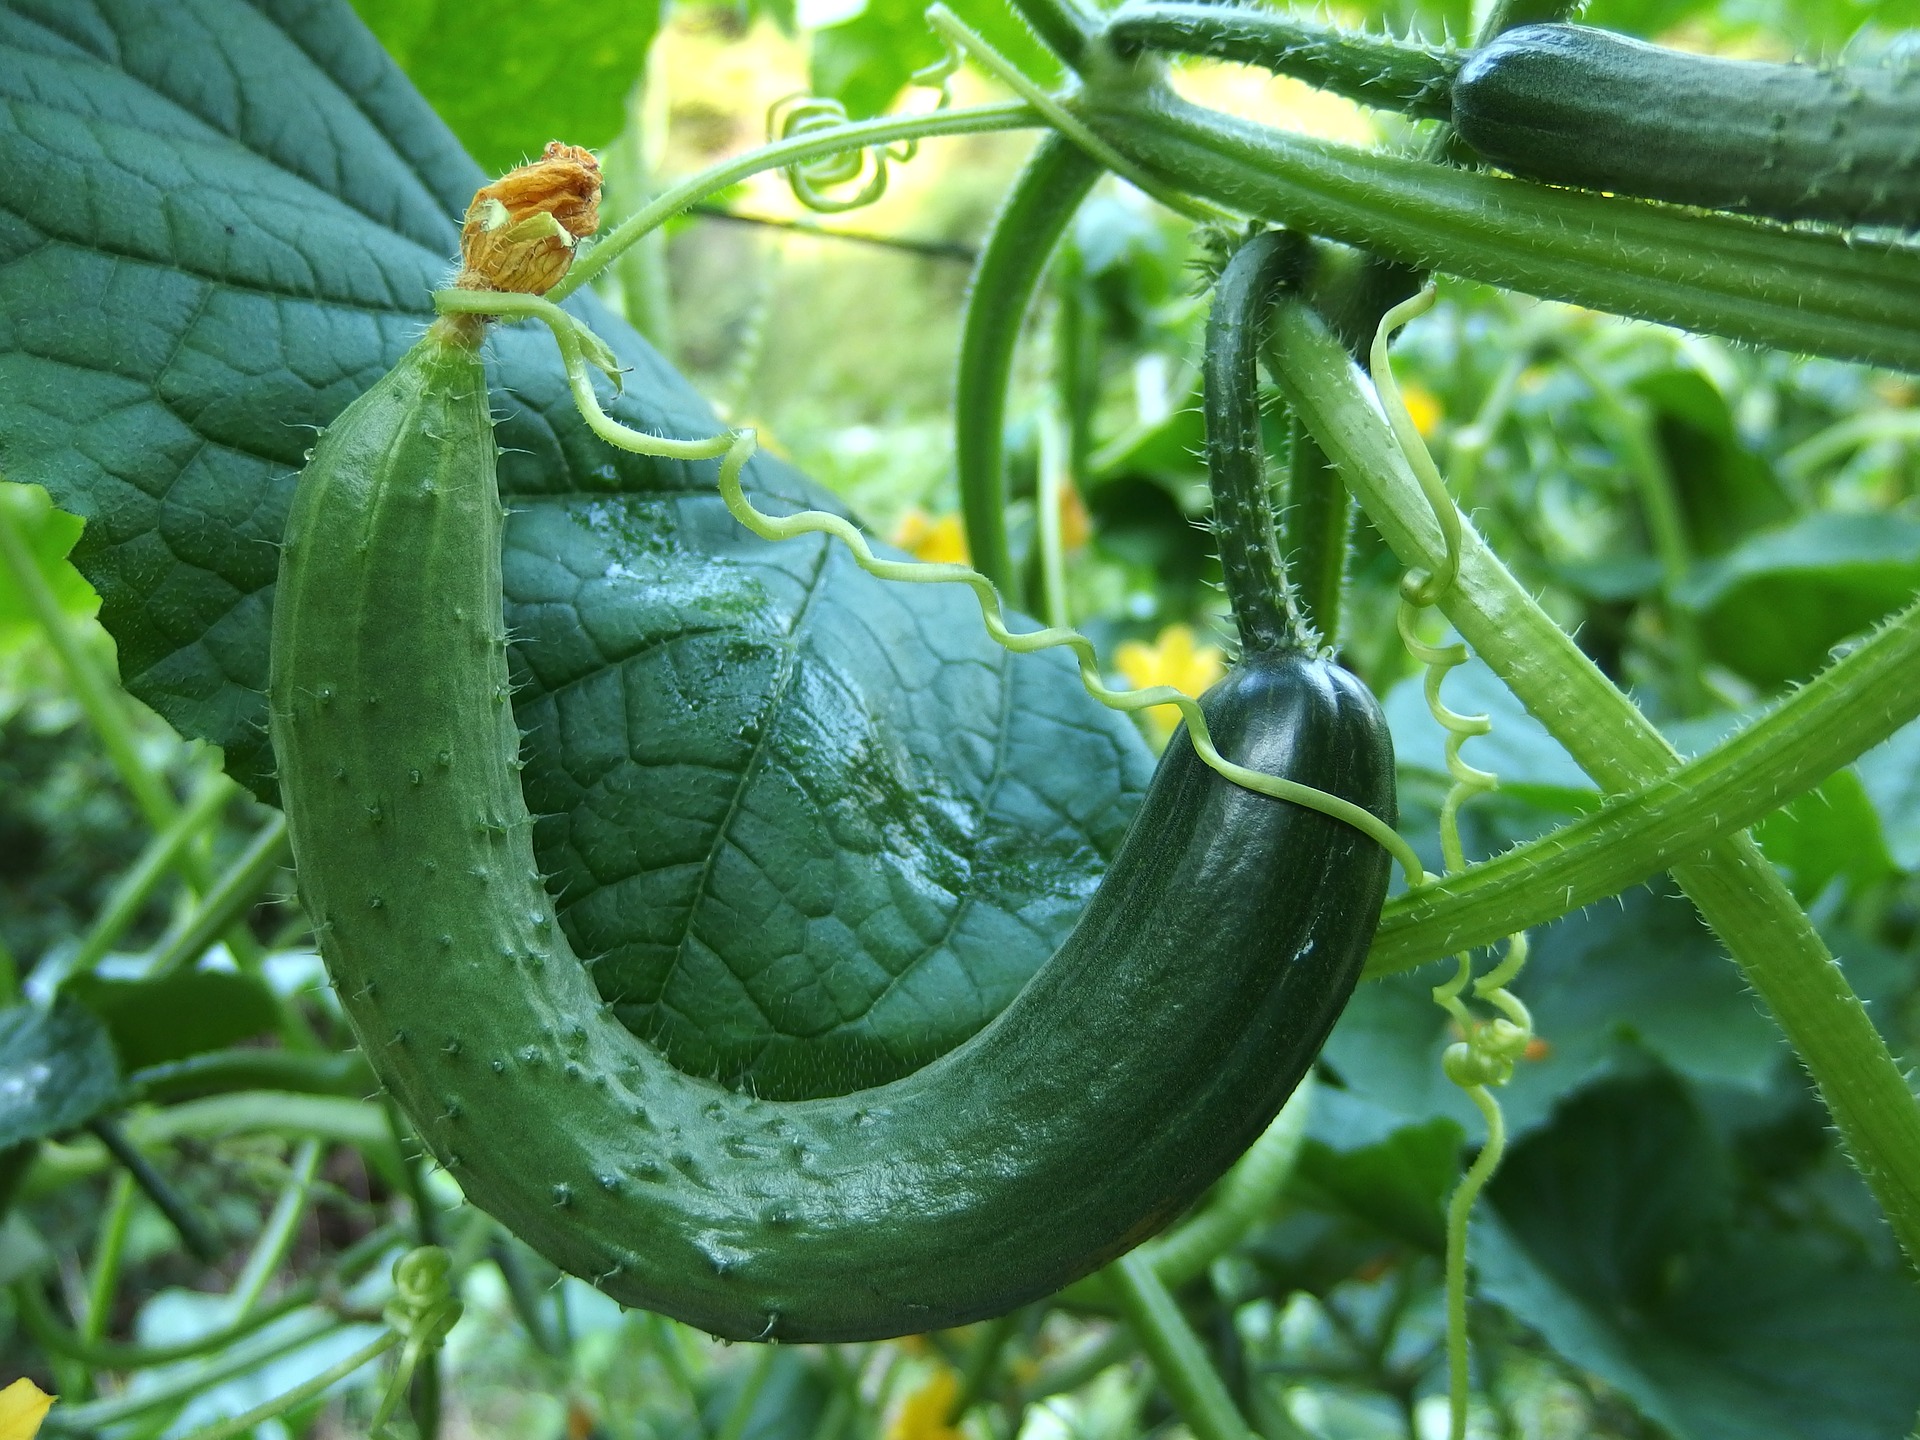 20 totally cool facts about cucumbers! - Michael Perry - Mr Plant Geek